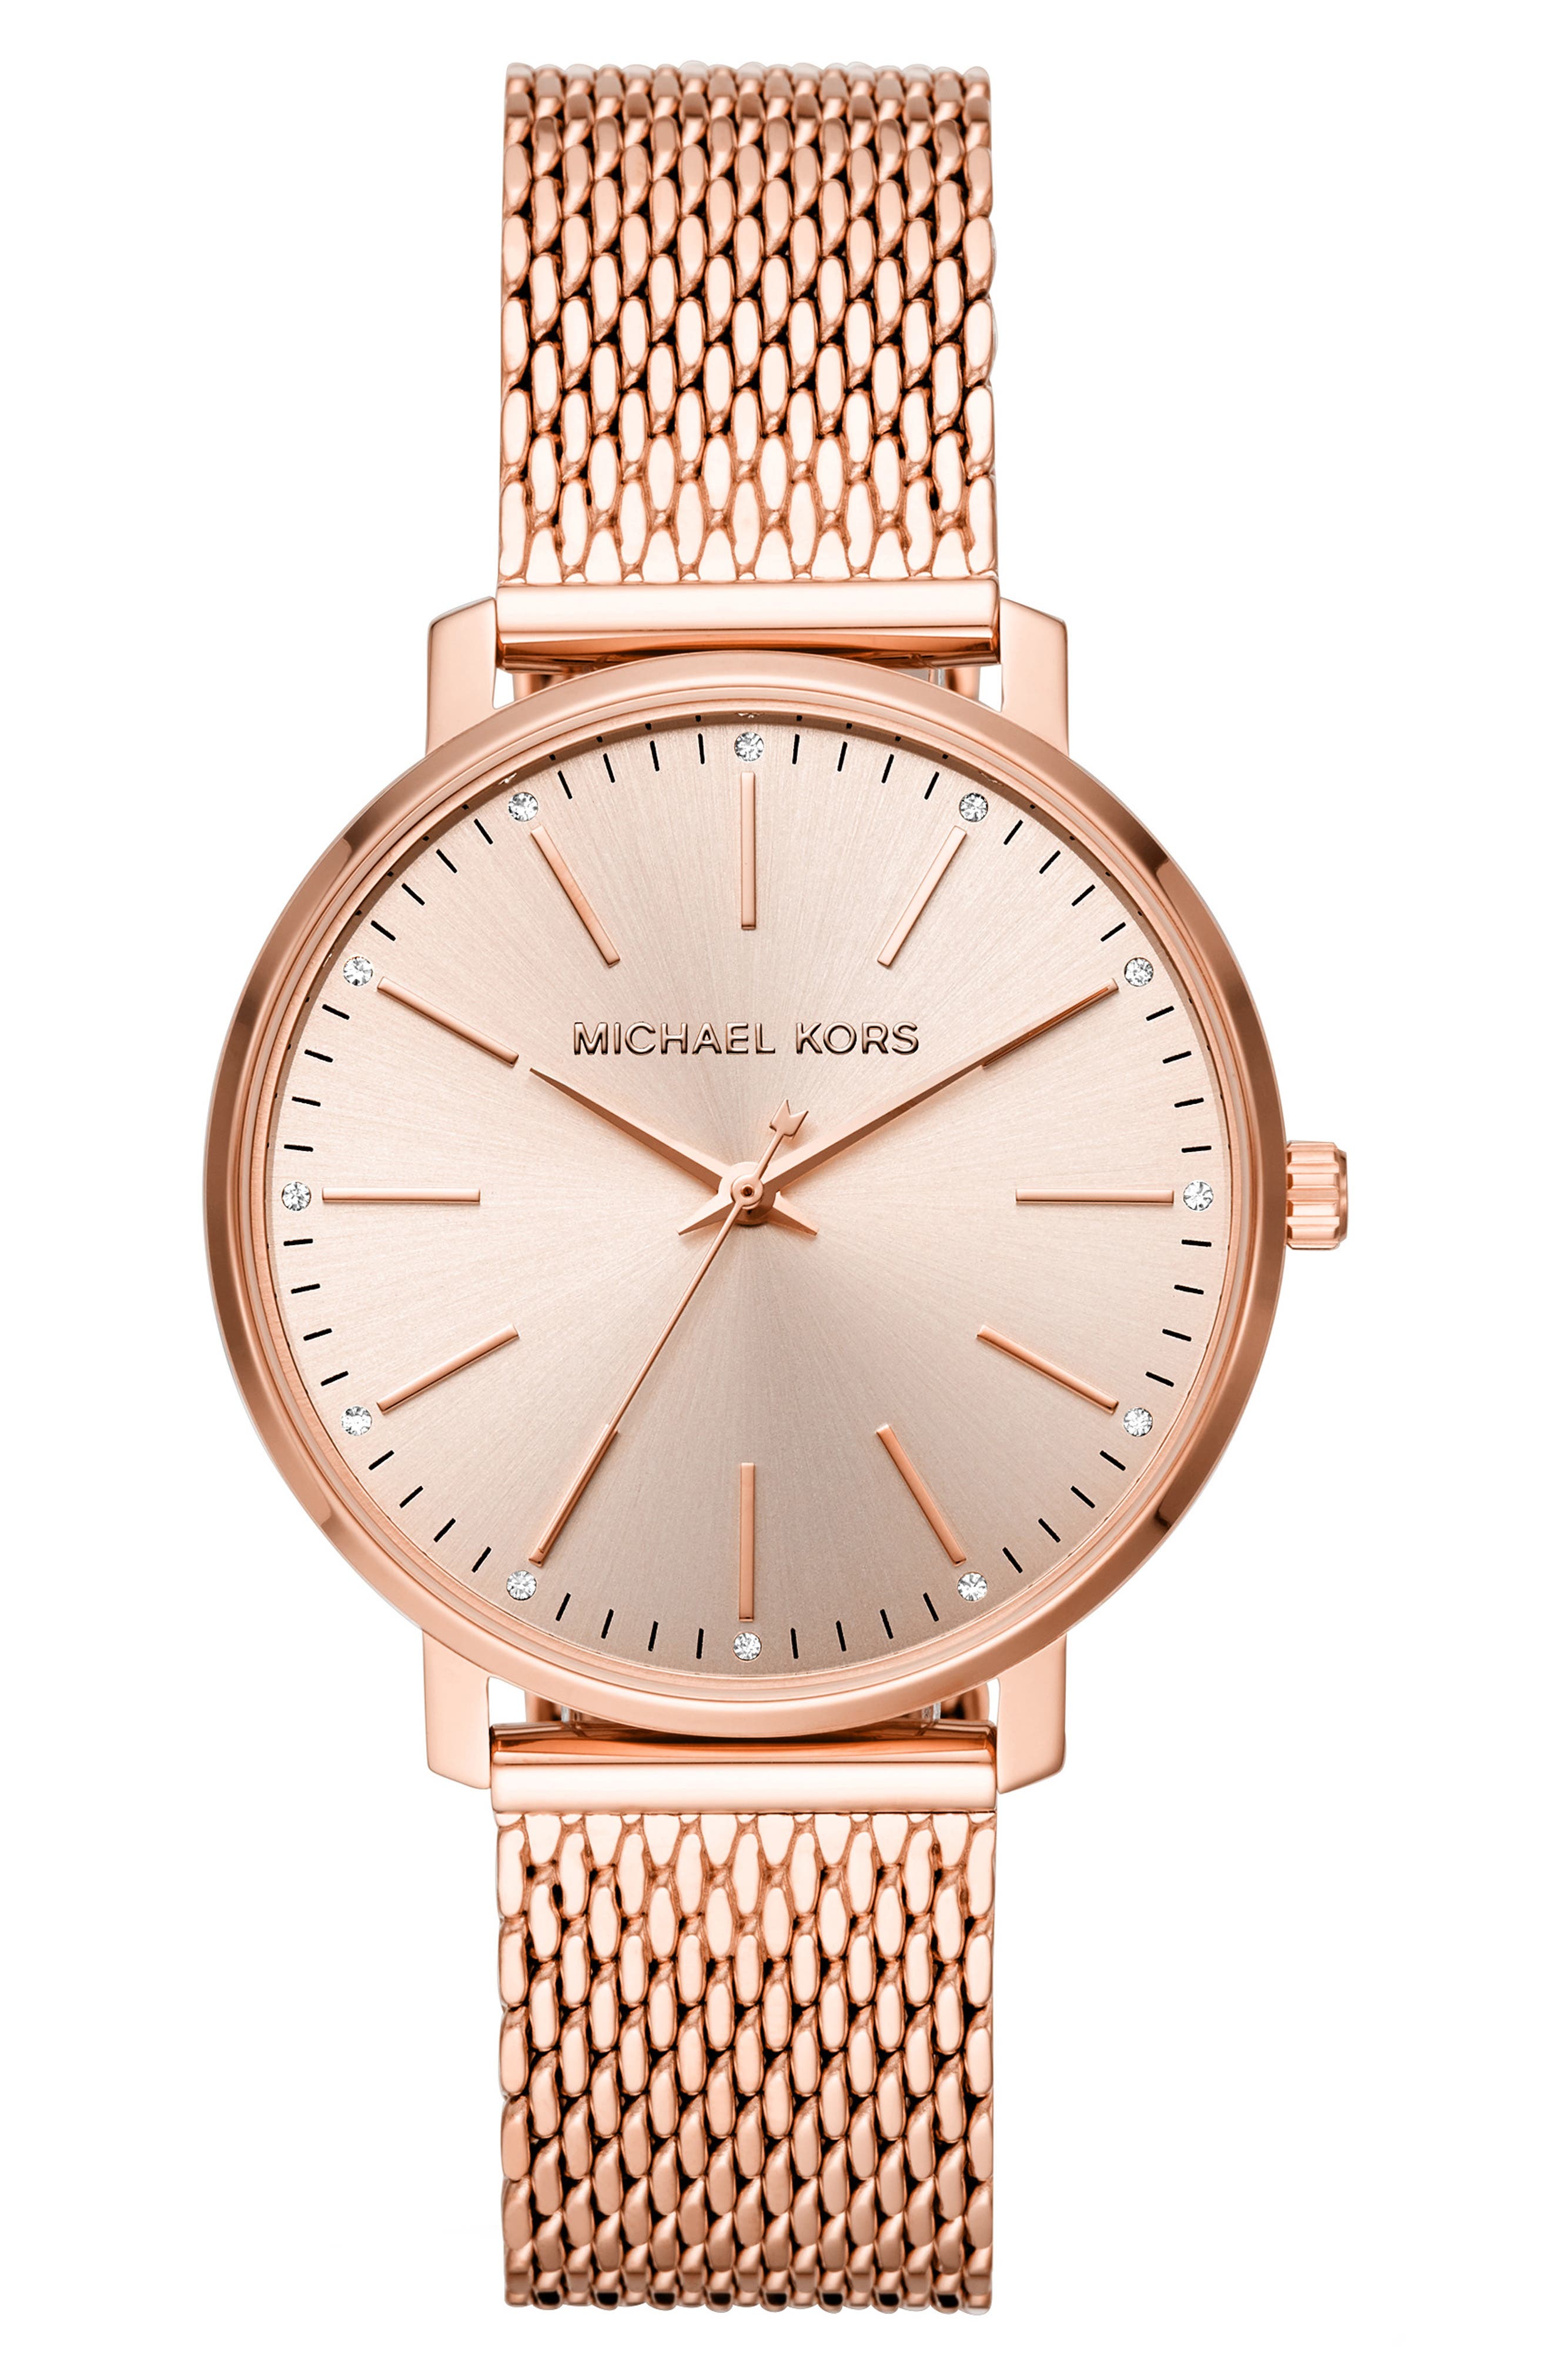 is michael kors good watches